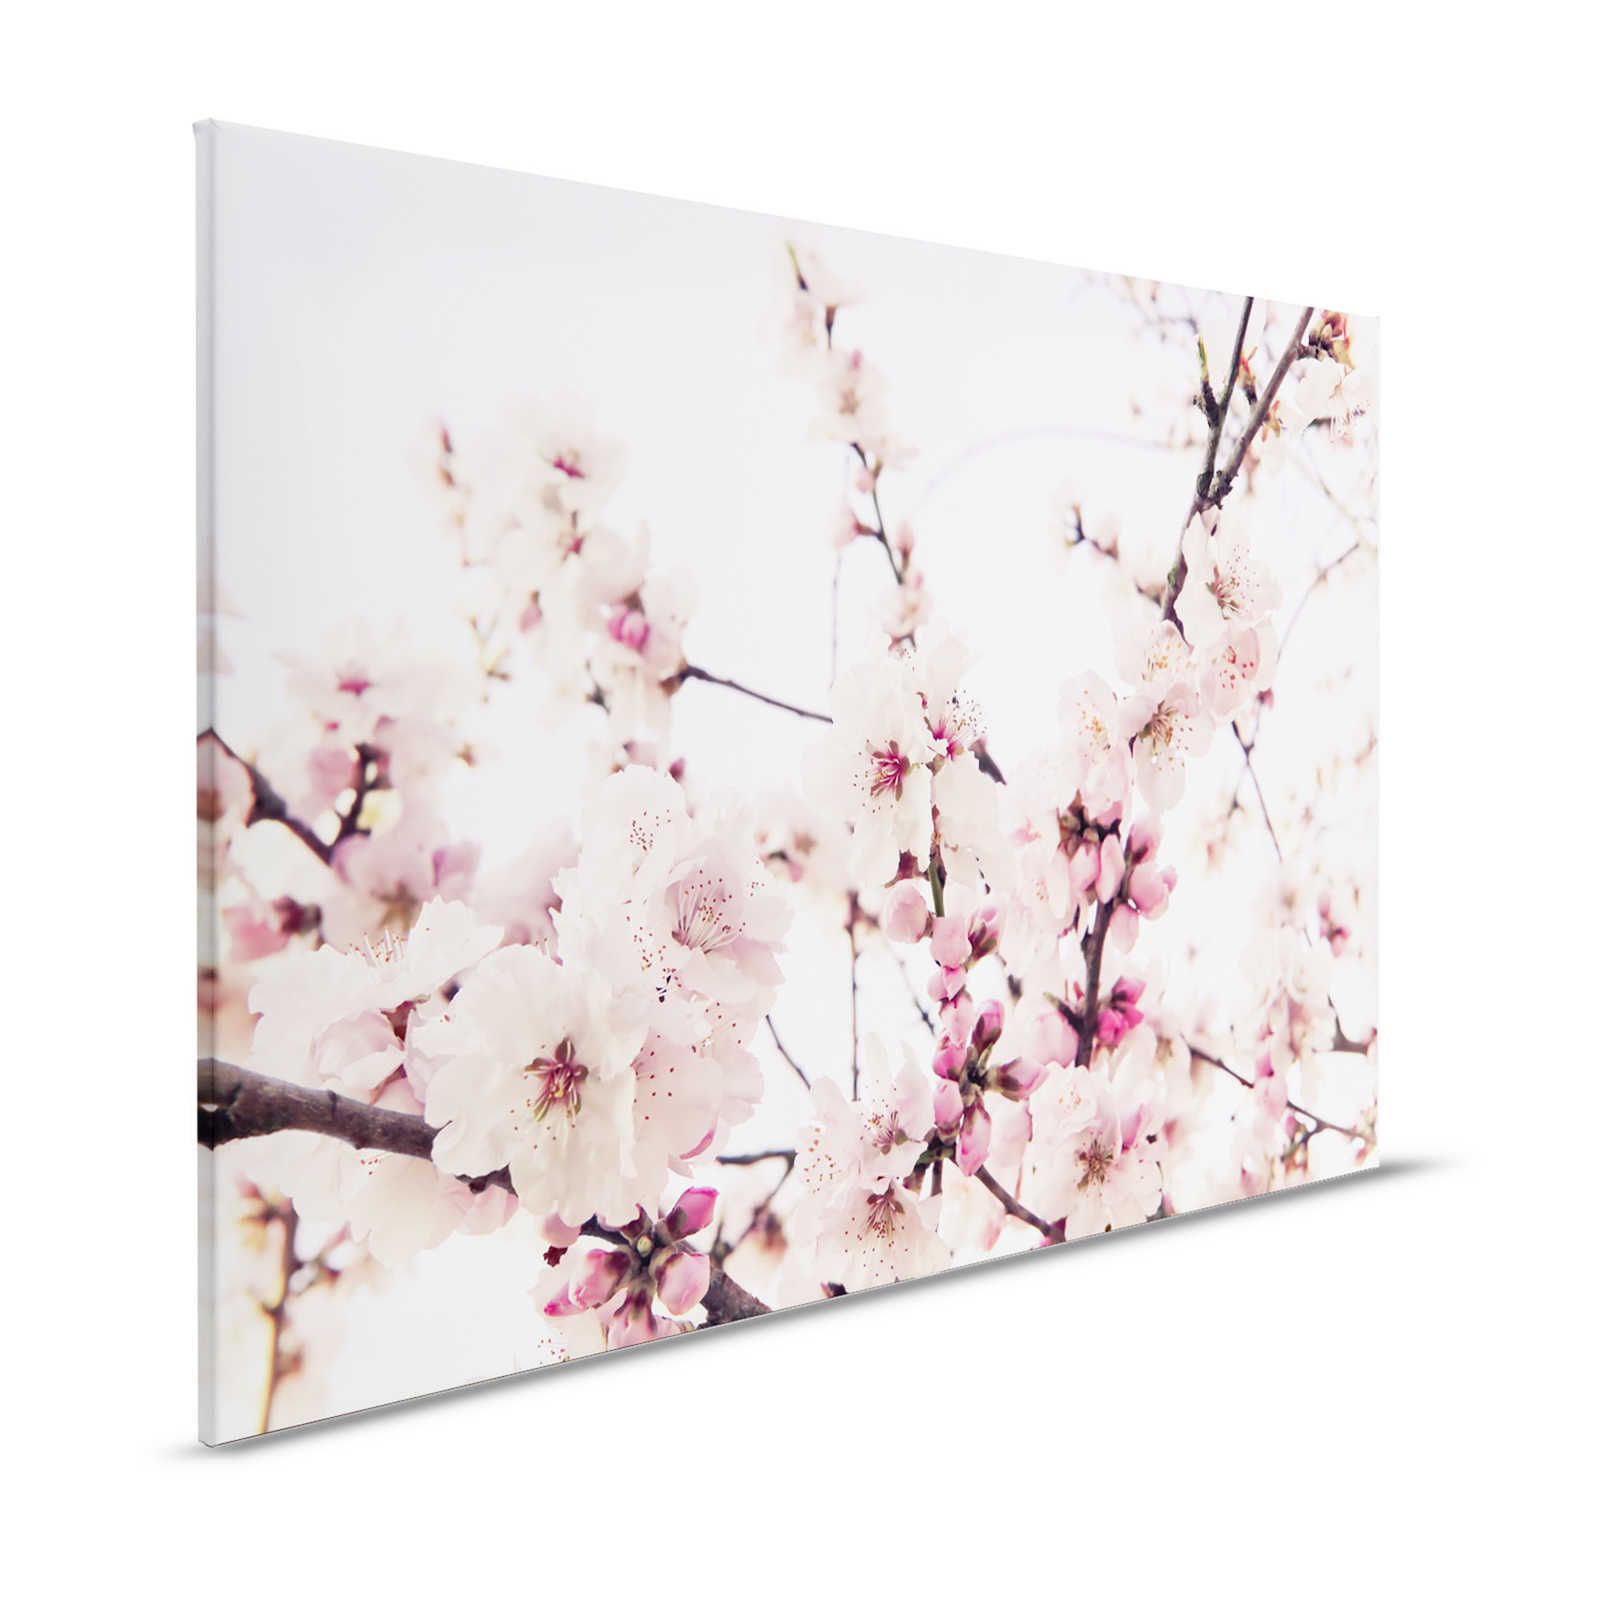 Nature Canvas Painting with Cherry Blossoms - 1.20 m x 0.80 m
